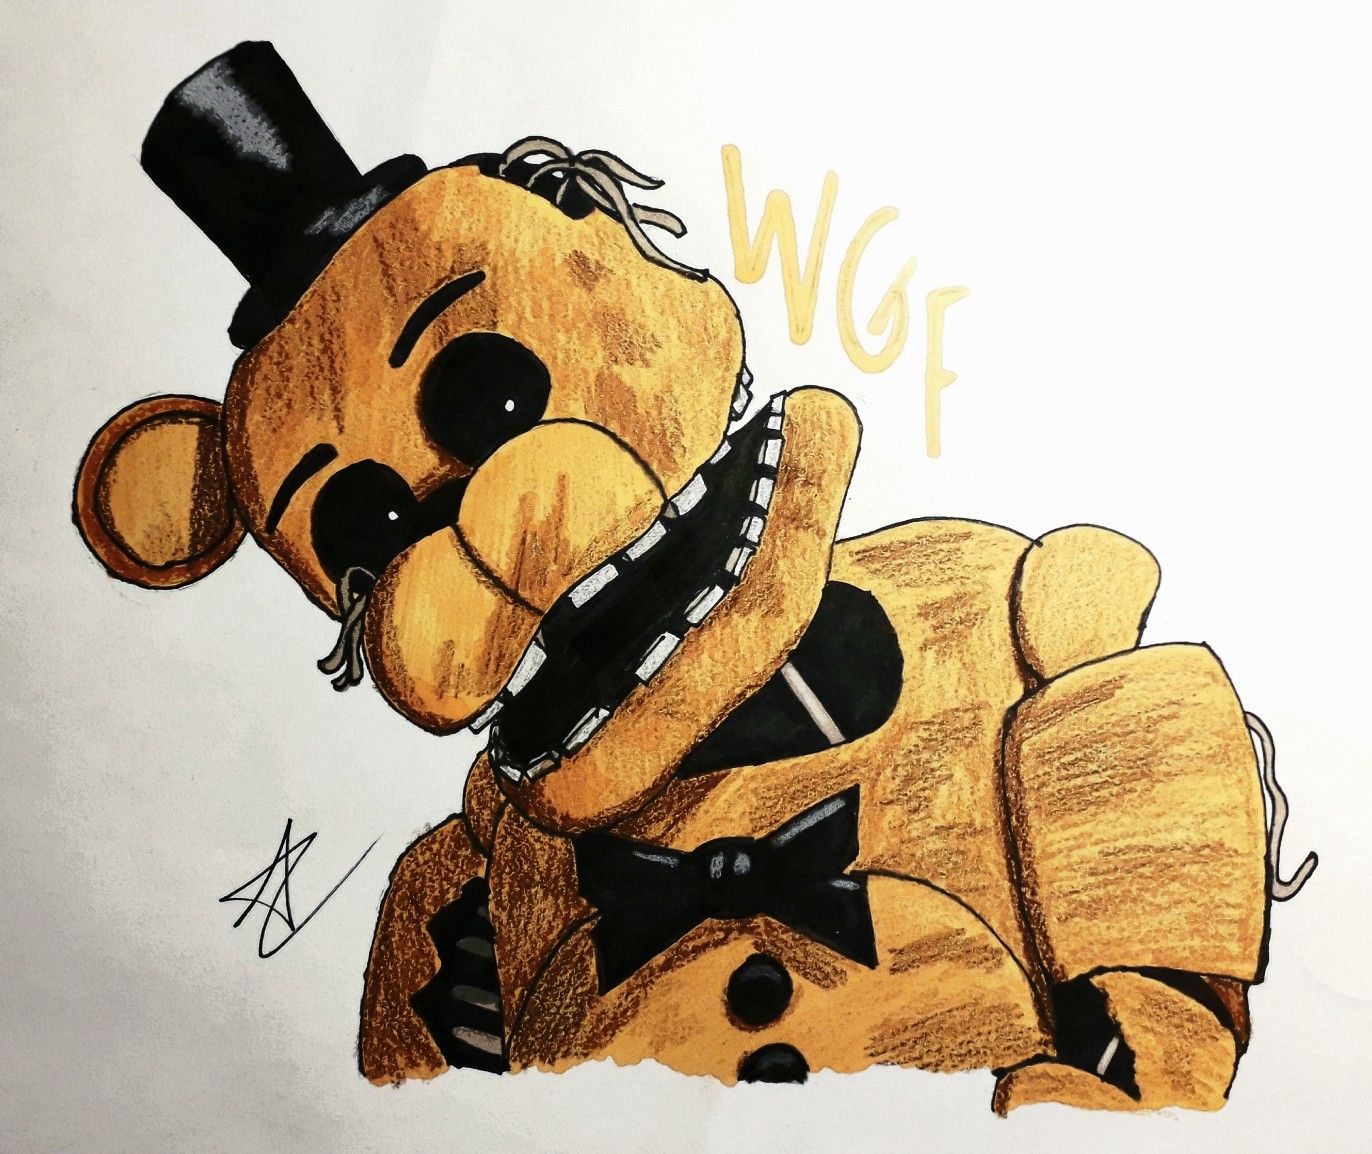 Fnaf Golden Freddy Fnaf Golden Freddy Fnaf Fnaf Drawings | Images and ...